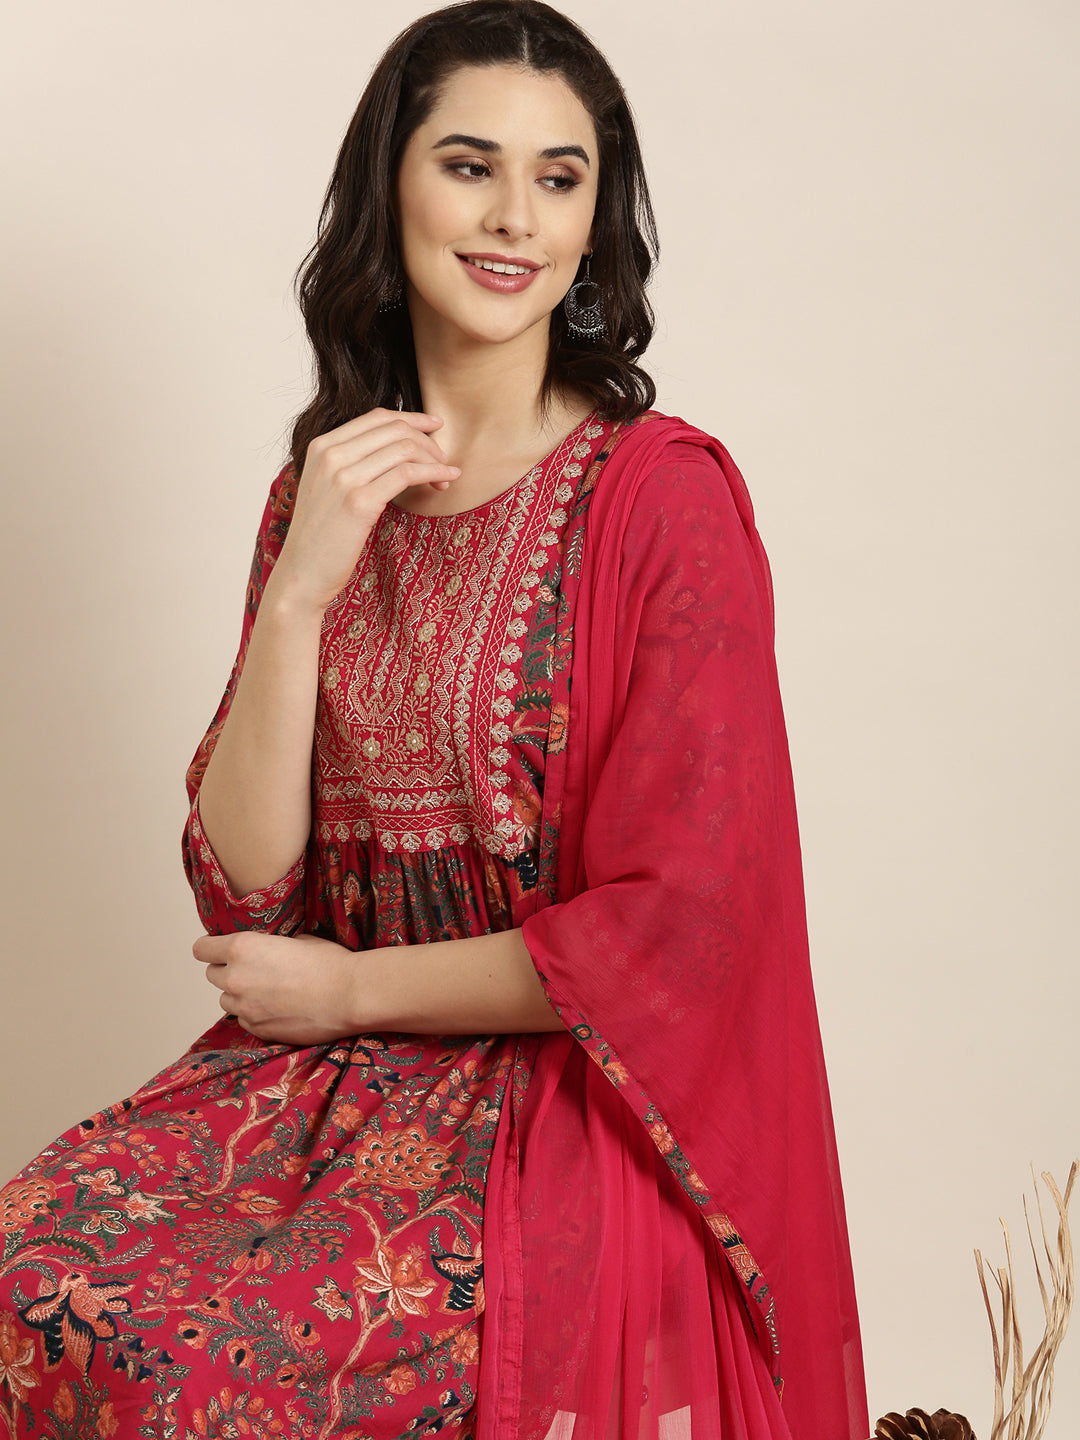 Women A-Line Pink Floral Kurta and Trousers Set Comes With Dupatta